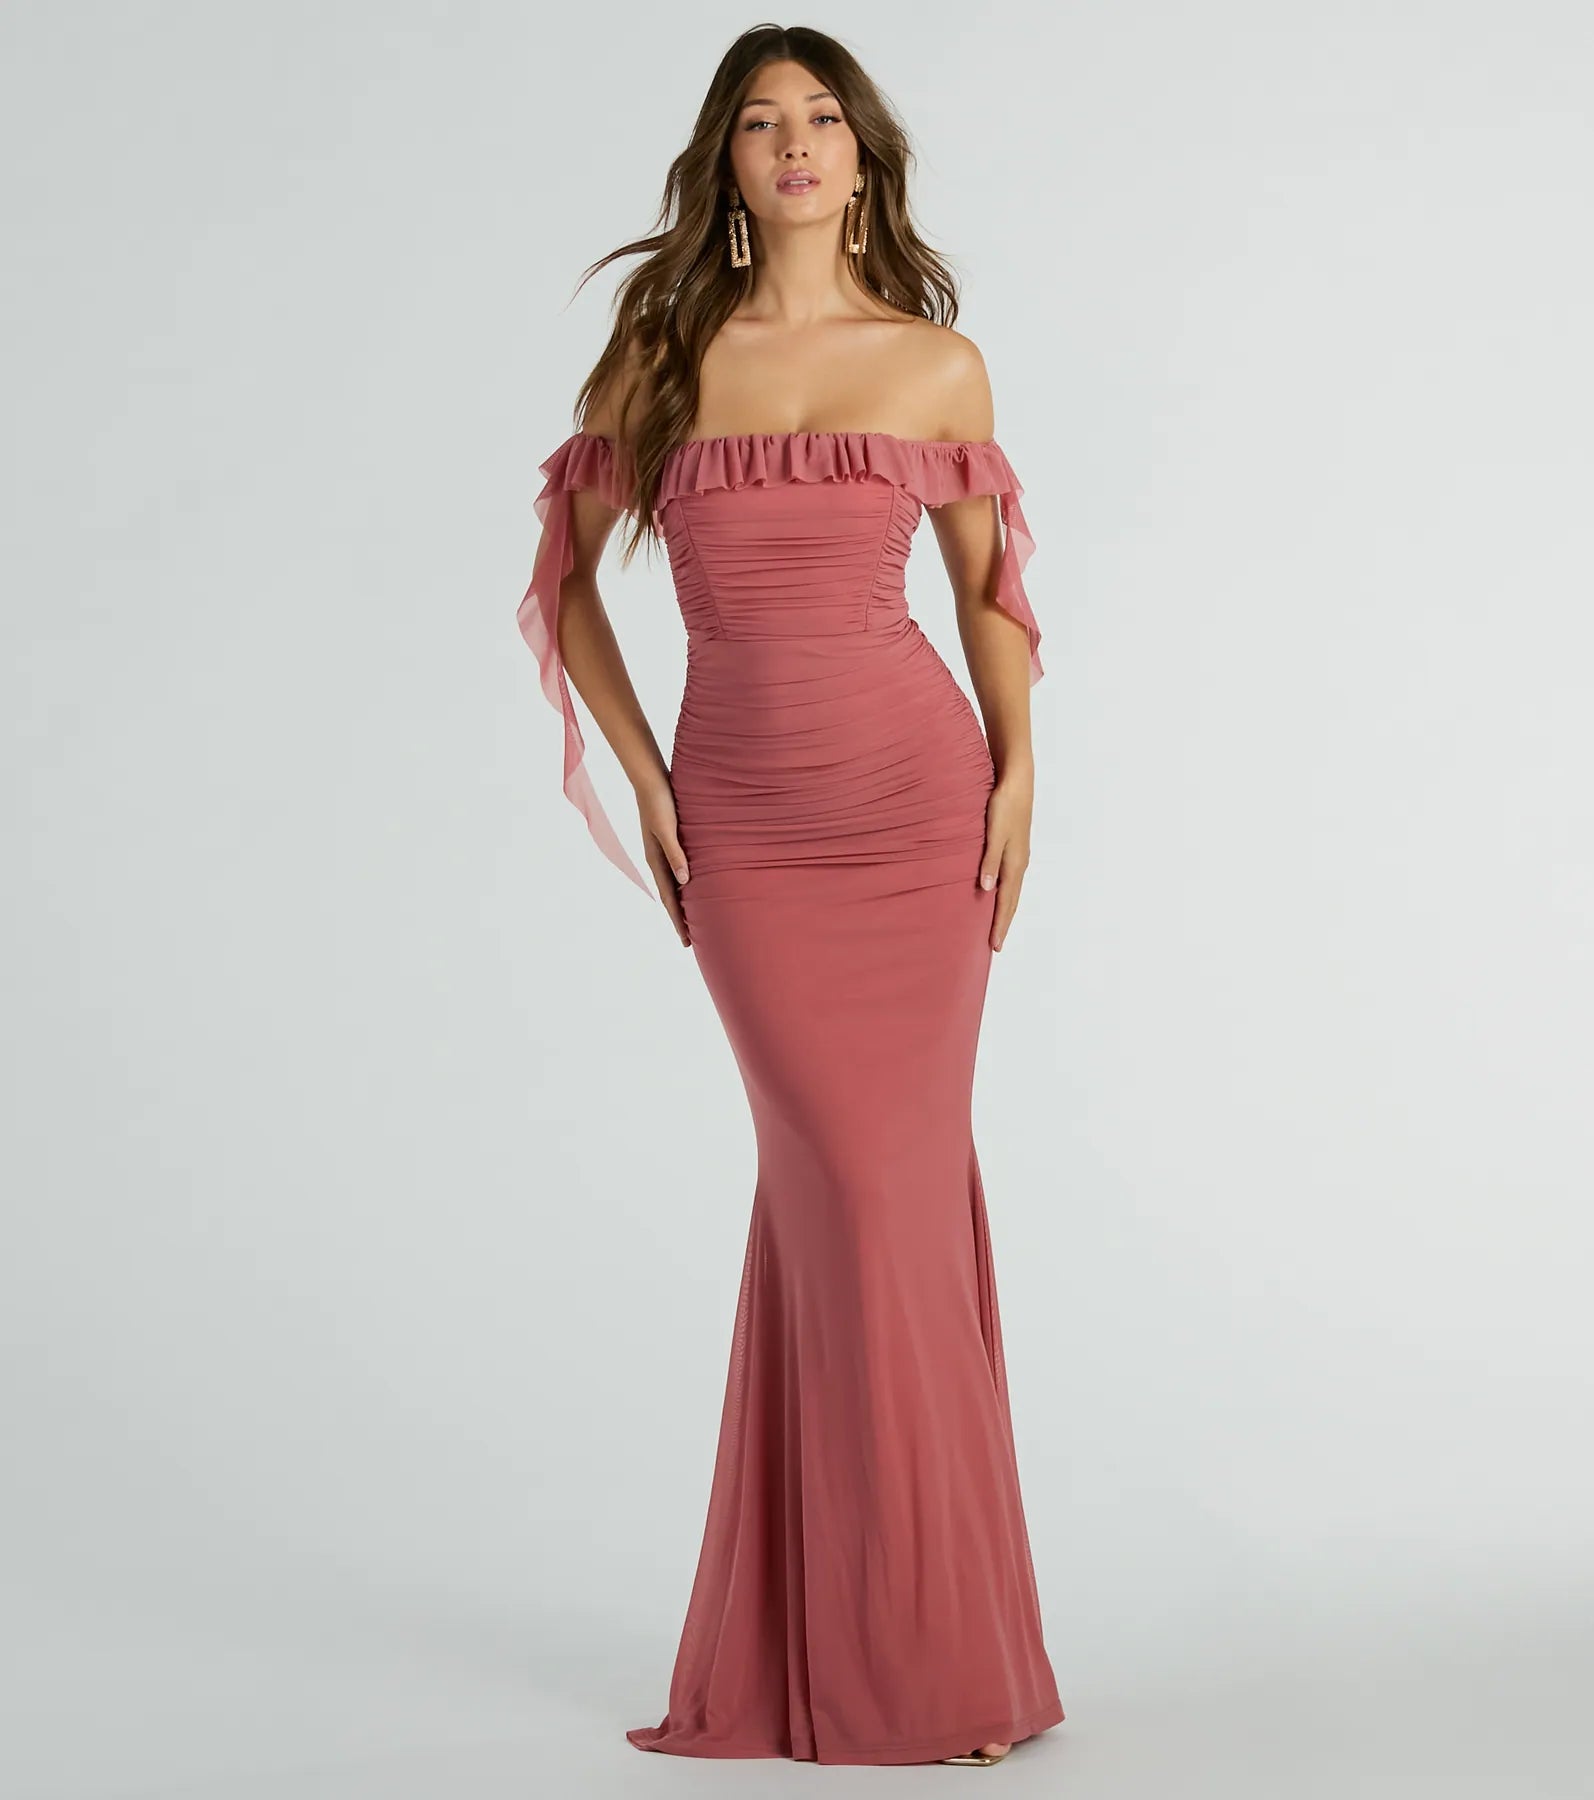 Sexy Sophisticated Knit Mermaid Off the Shoulder Stretchy Mesh Ruched Maxi Dress With Ruffles